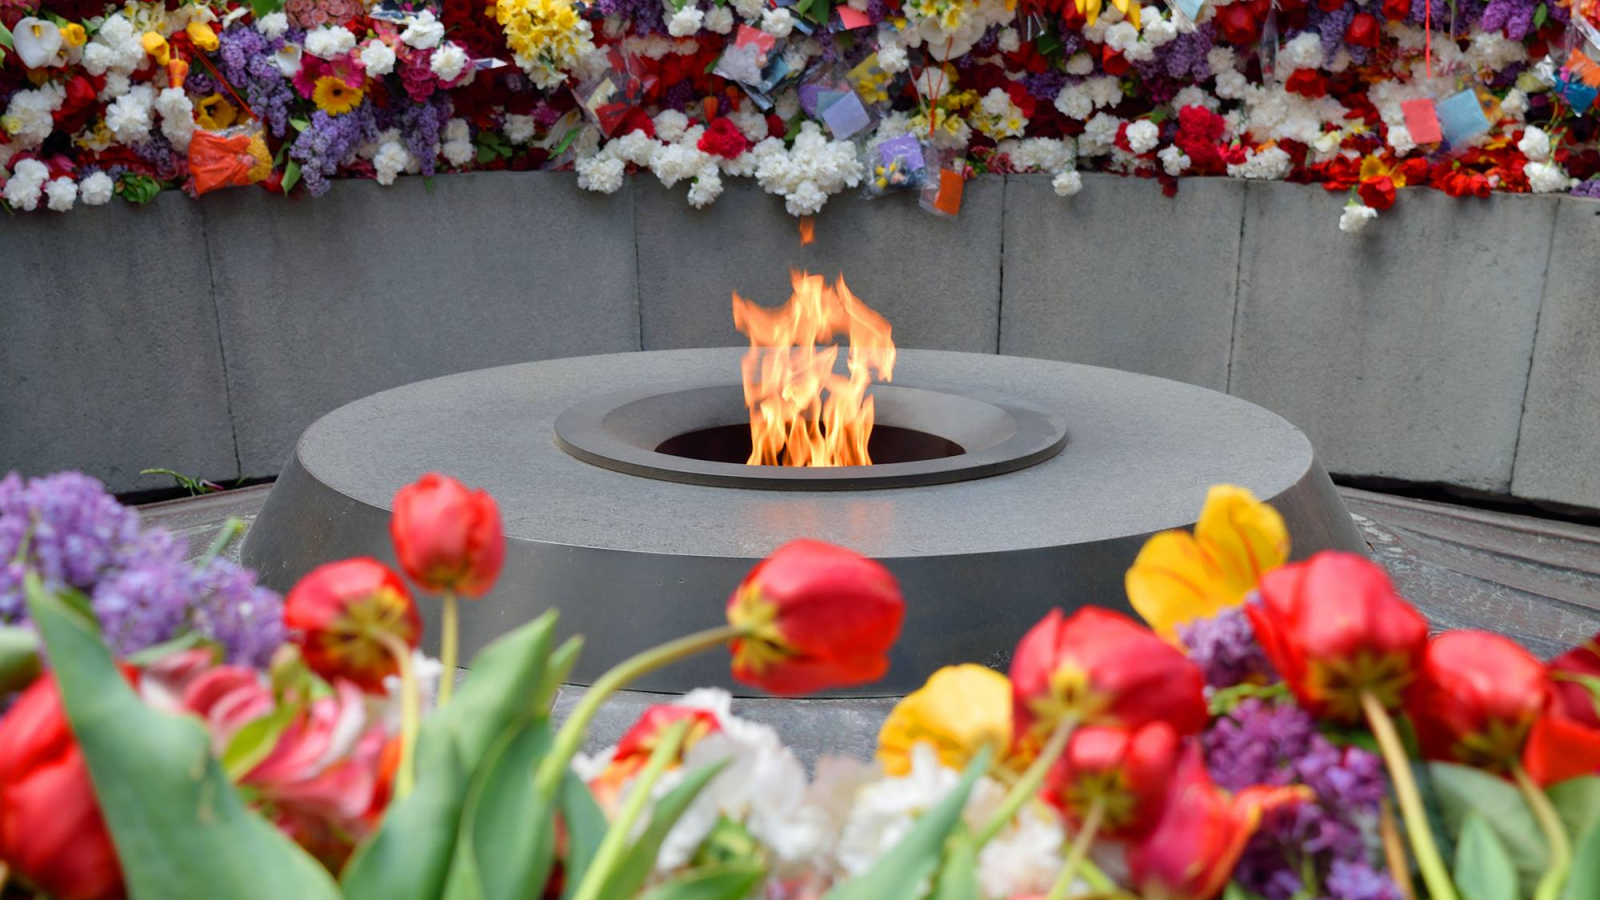 EU pays tribute to victims of Armenian Genocide